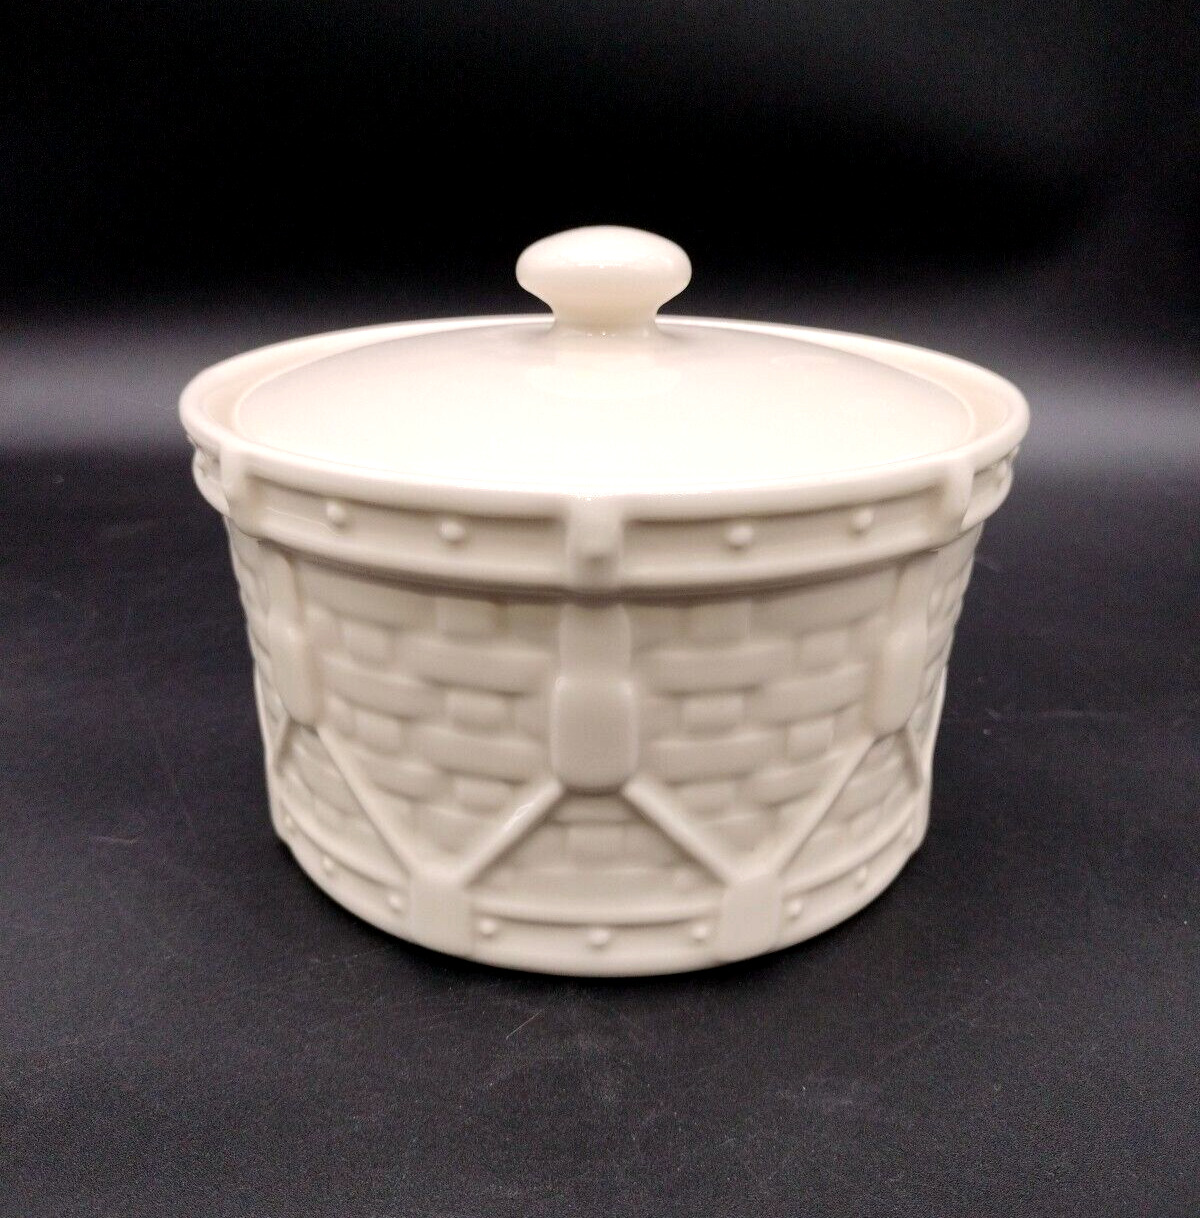 Longaberger Crock Ivory Woven Traditions Pottery Drum Container Made in the USA